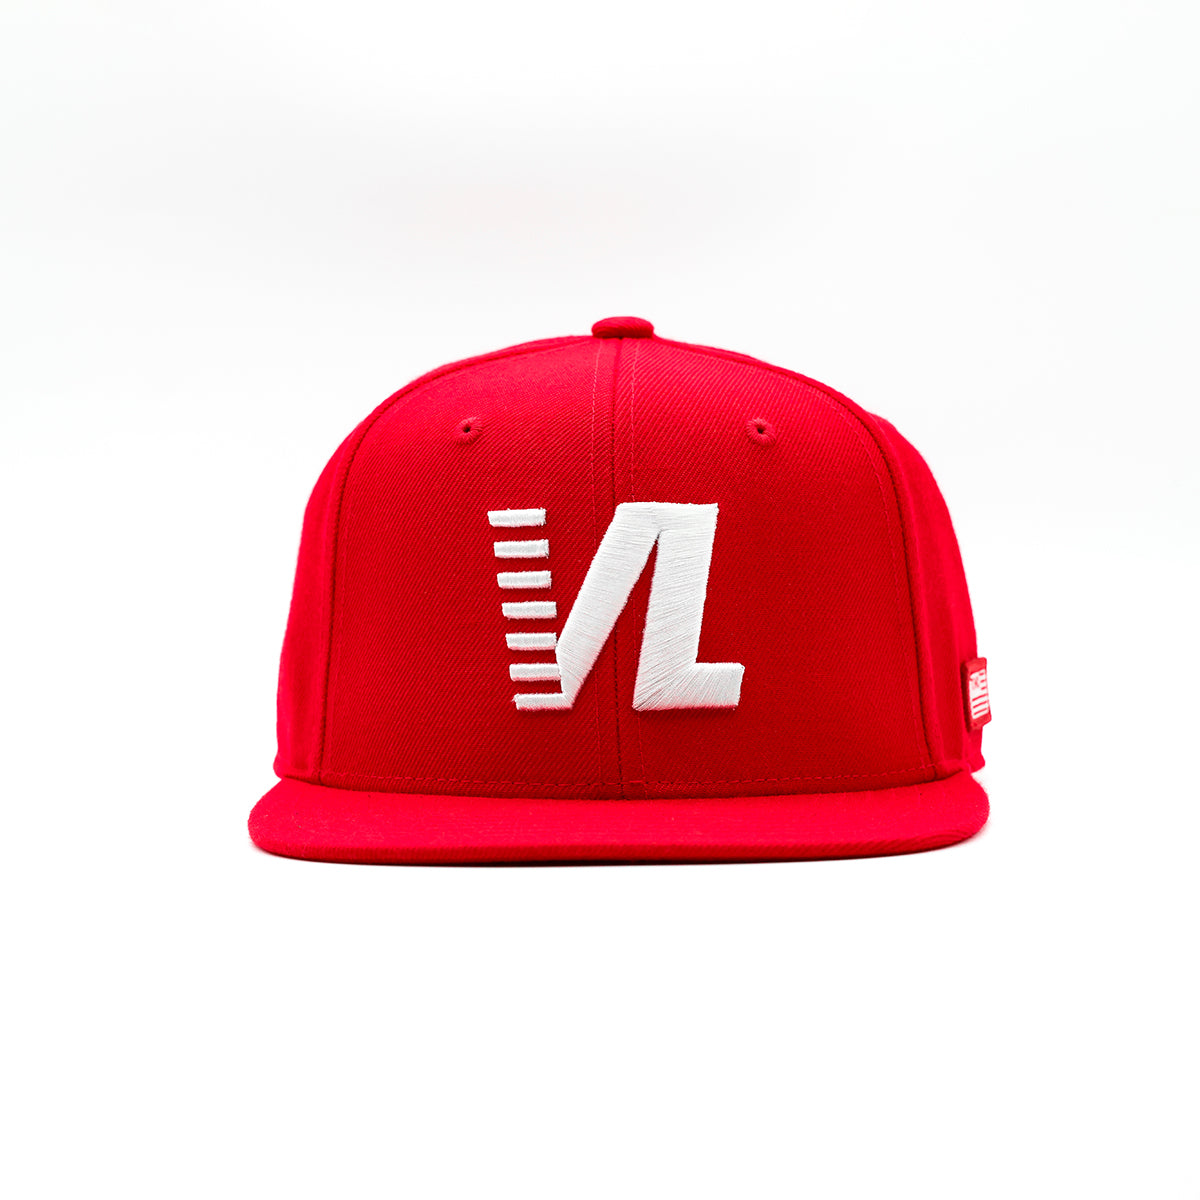 Victory Lap Limited Edition Snapback - Red/White - Front